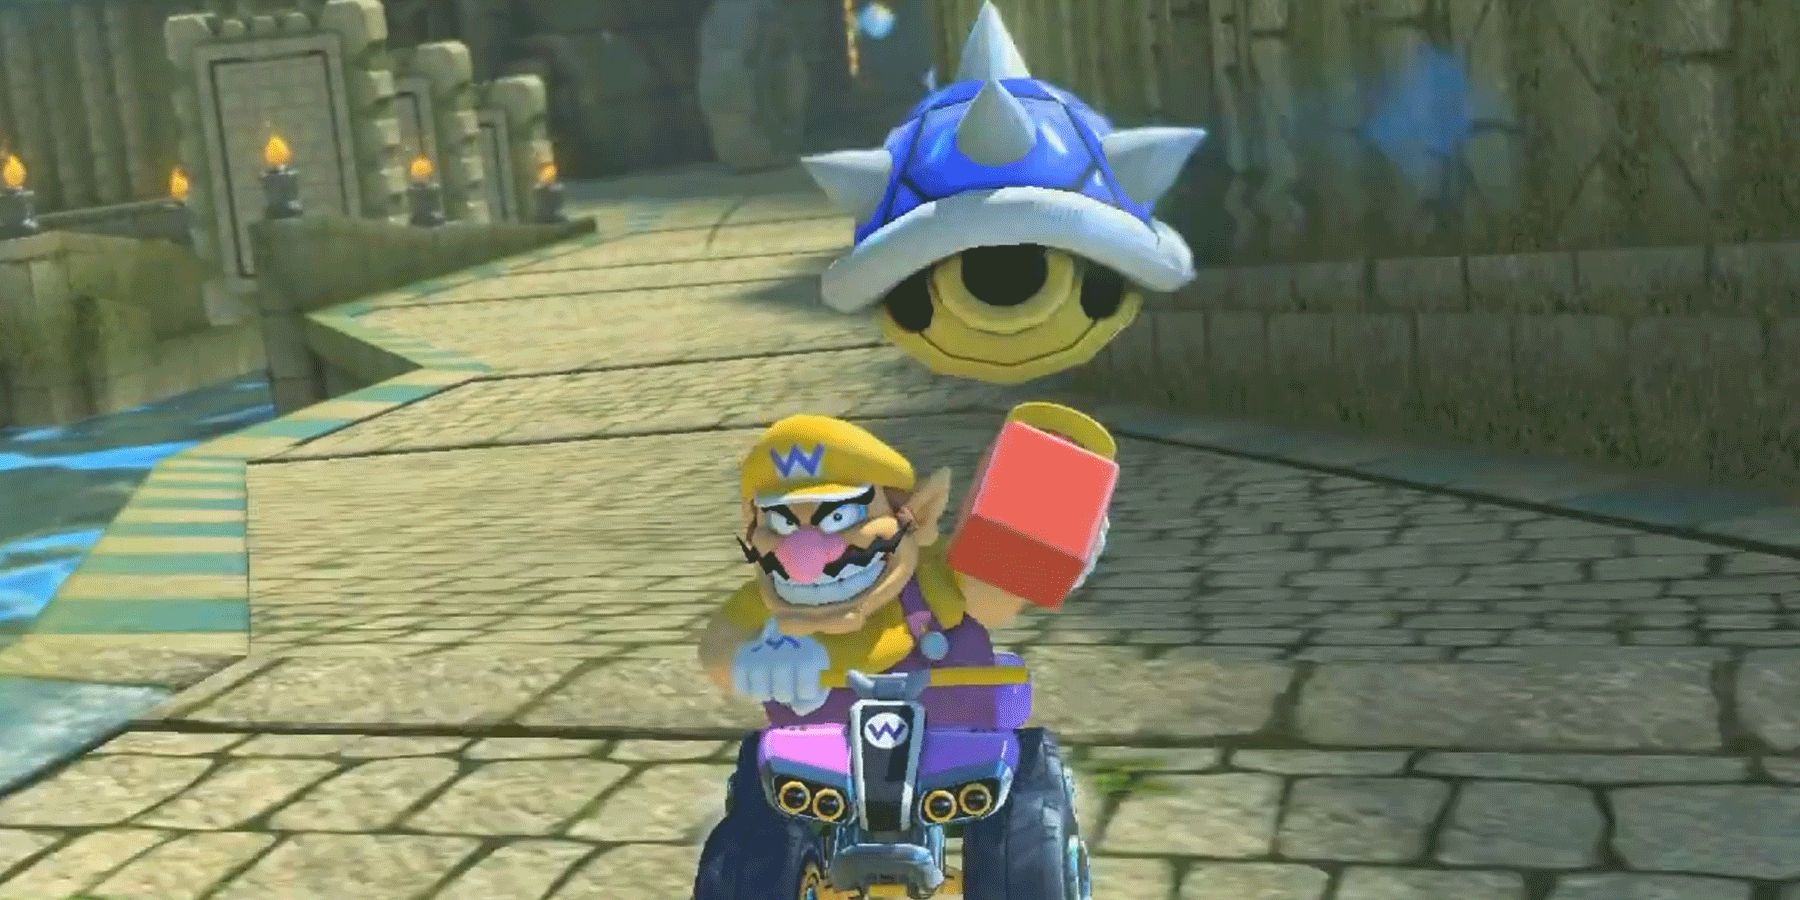 Wario with a Super Horn about to be hit by a Blue Shell